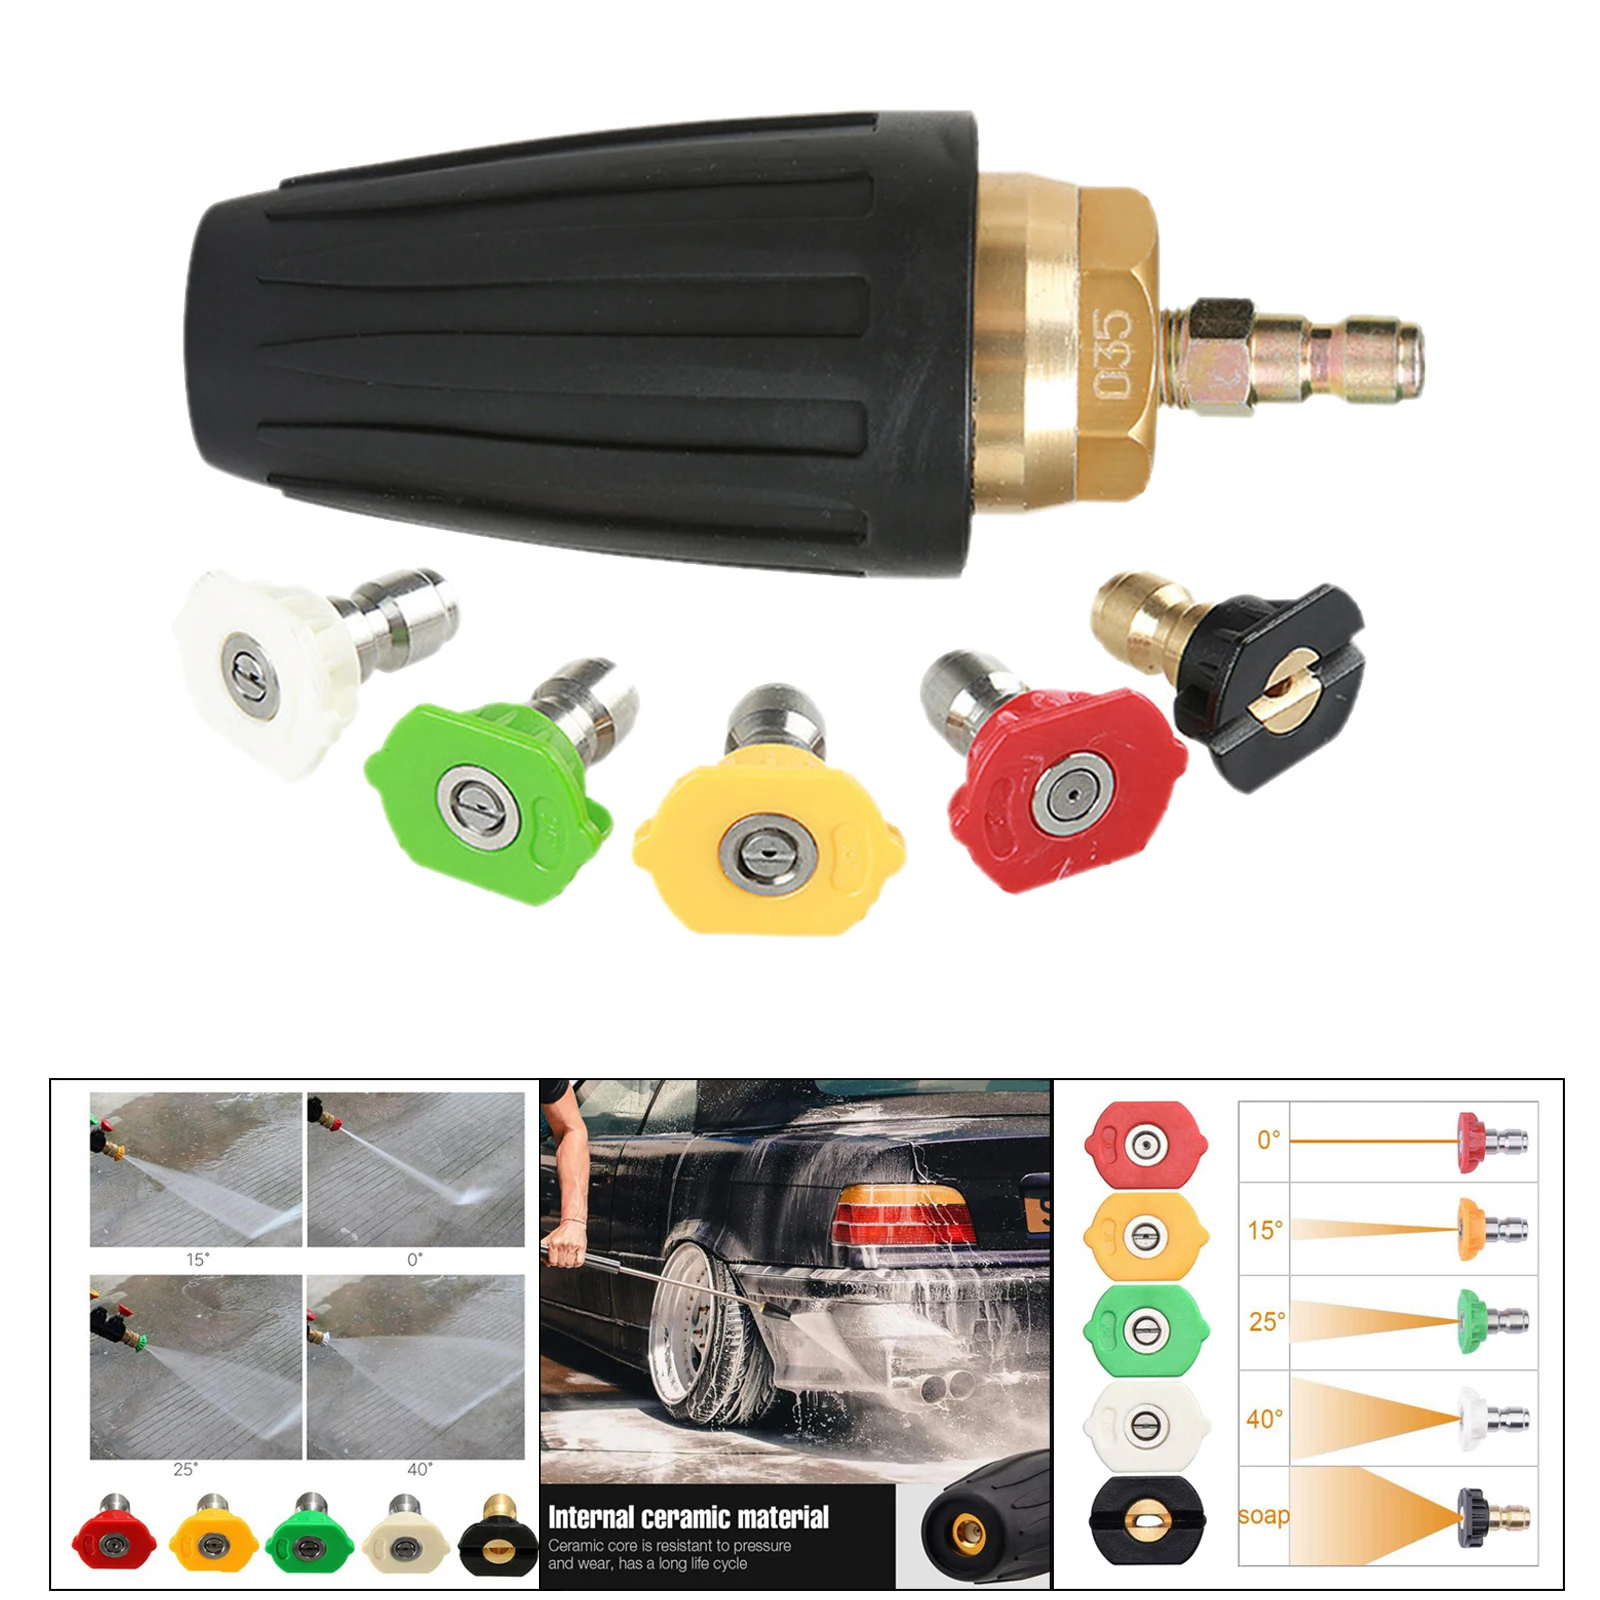 Power High Pressure Washer Wand Extension Set Adapter 3000 PSI Turbo Spray Nozzle and 5 Tips 1/4 inch Quick Connect